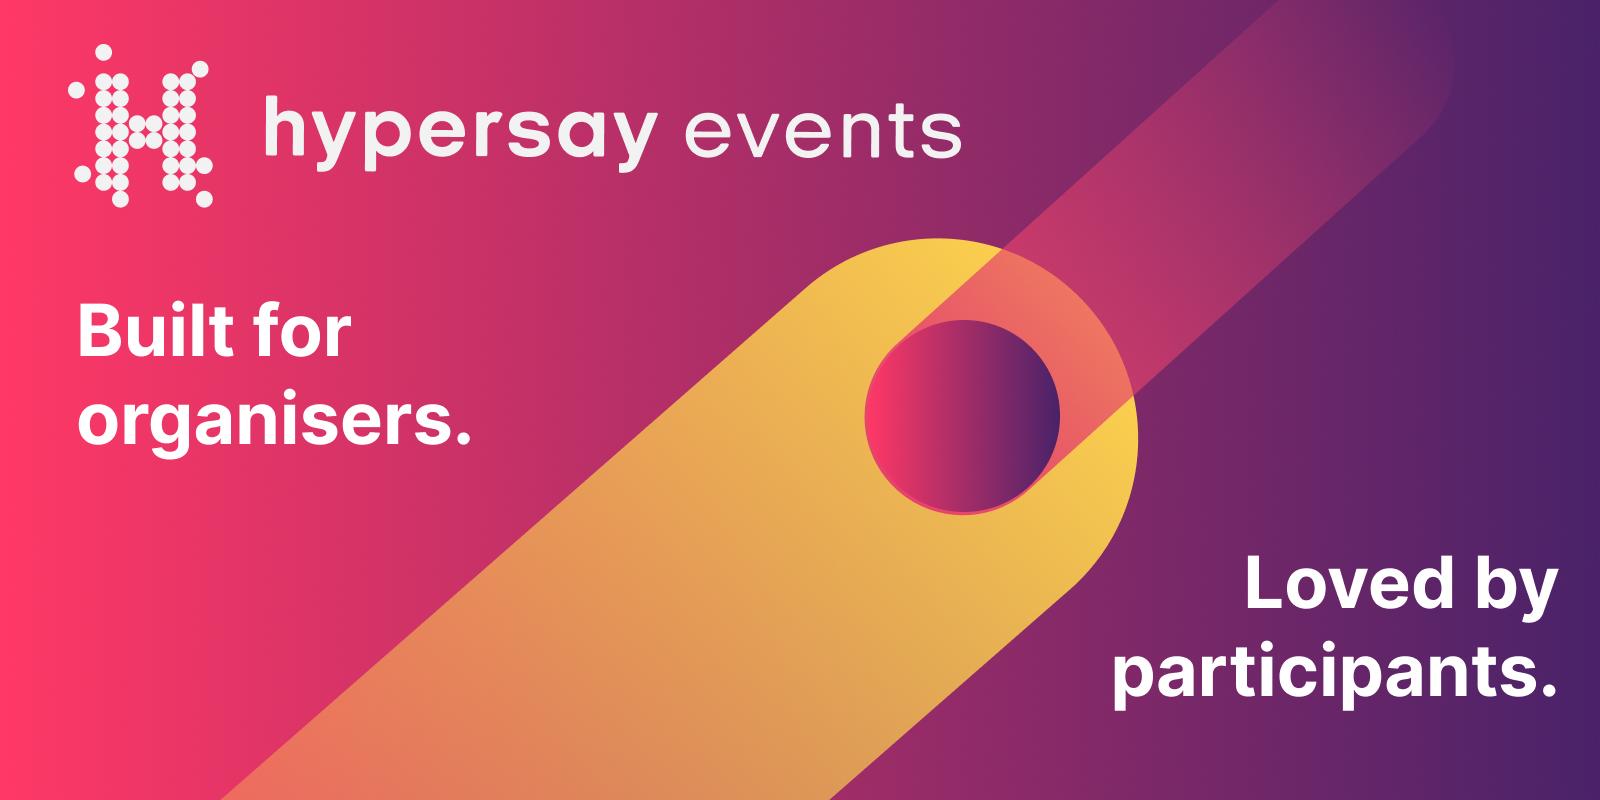 Review Hypersay Events: Built for organisers. Loved by participants - Appvizer